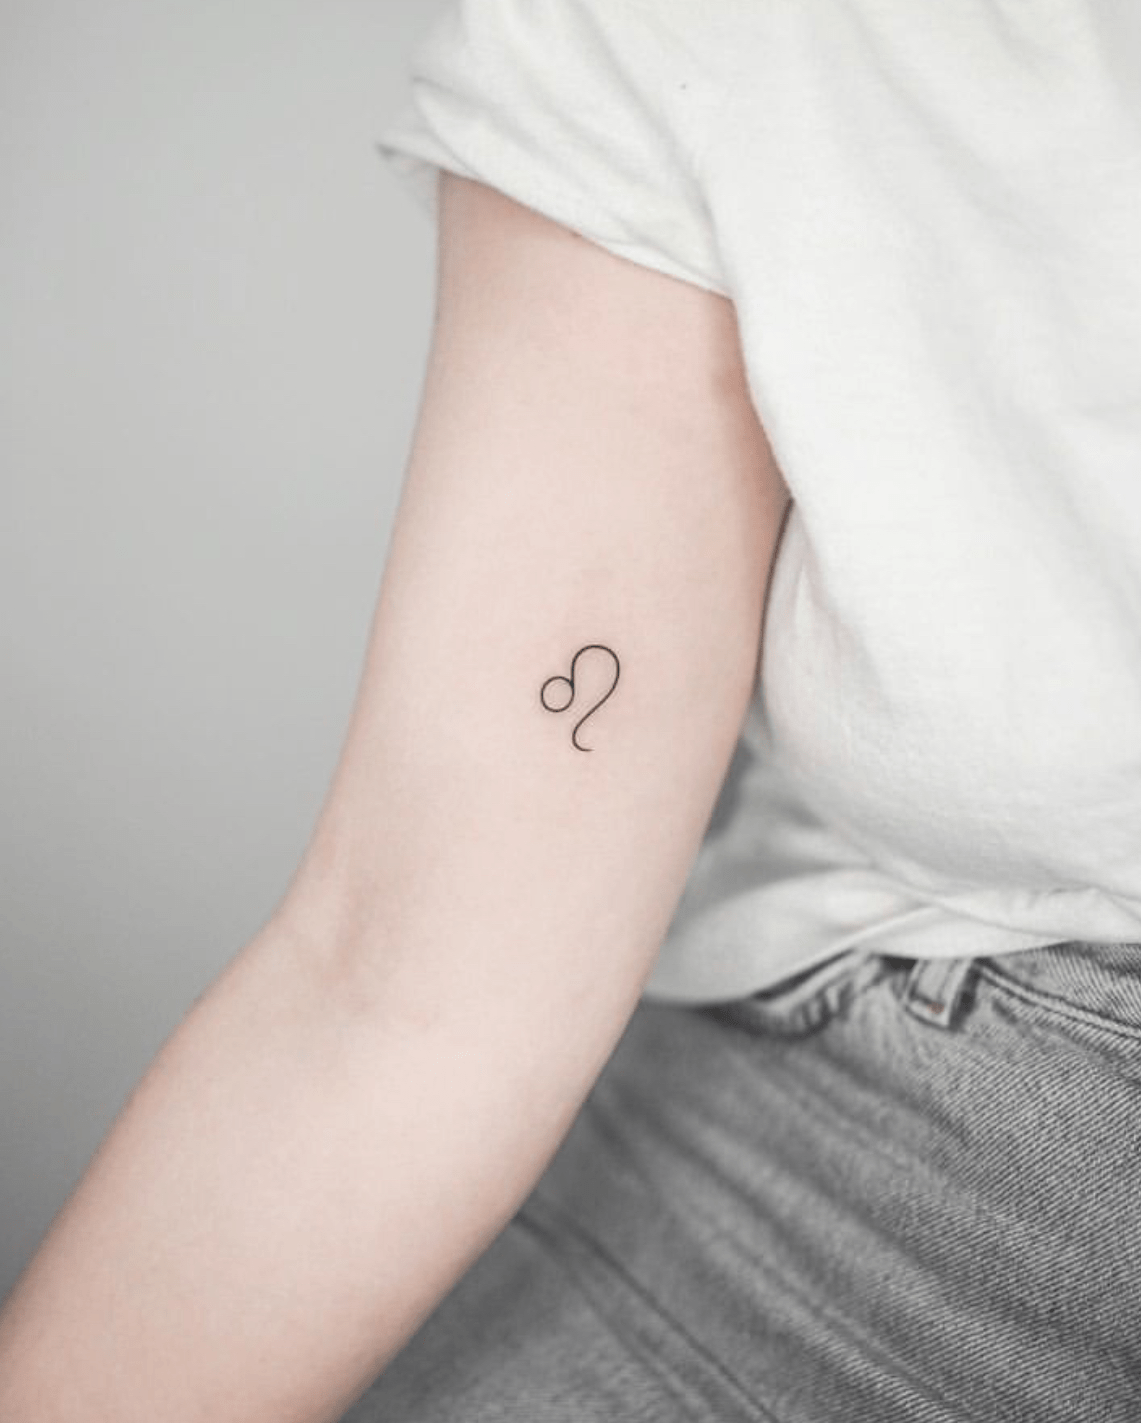 60 Small Tattoo Designs with Very Powerful Meanings | Small symbol tattoos,  Tattoo designs and meanings, Small tattoo designs